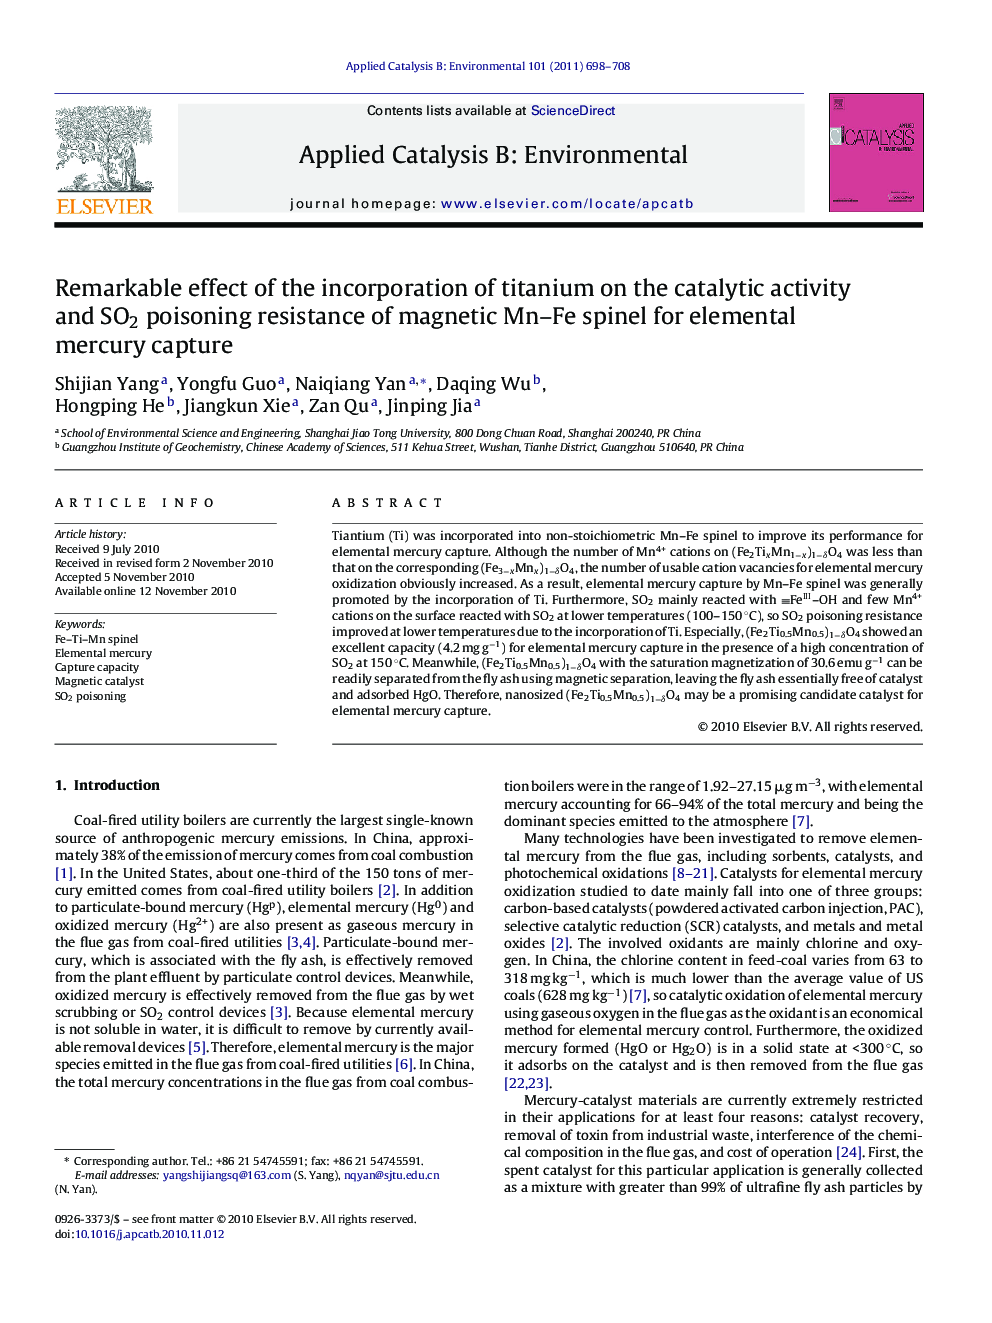 Remarkable effect of the incorporation of titanium on the catalytic activity and SO2 poisoning resistance of magnetic Mn-Fe spinel for elemental mercury capture